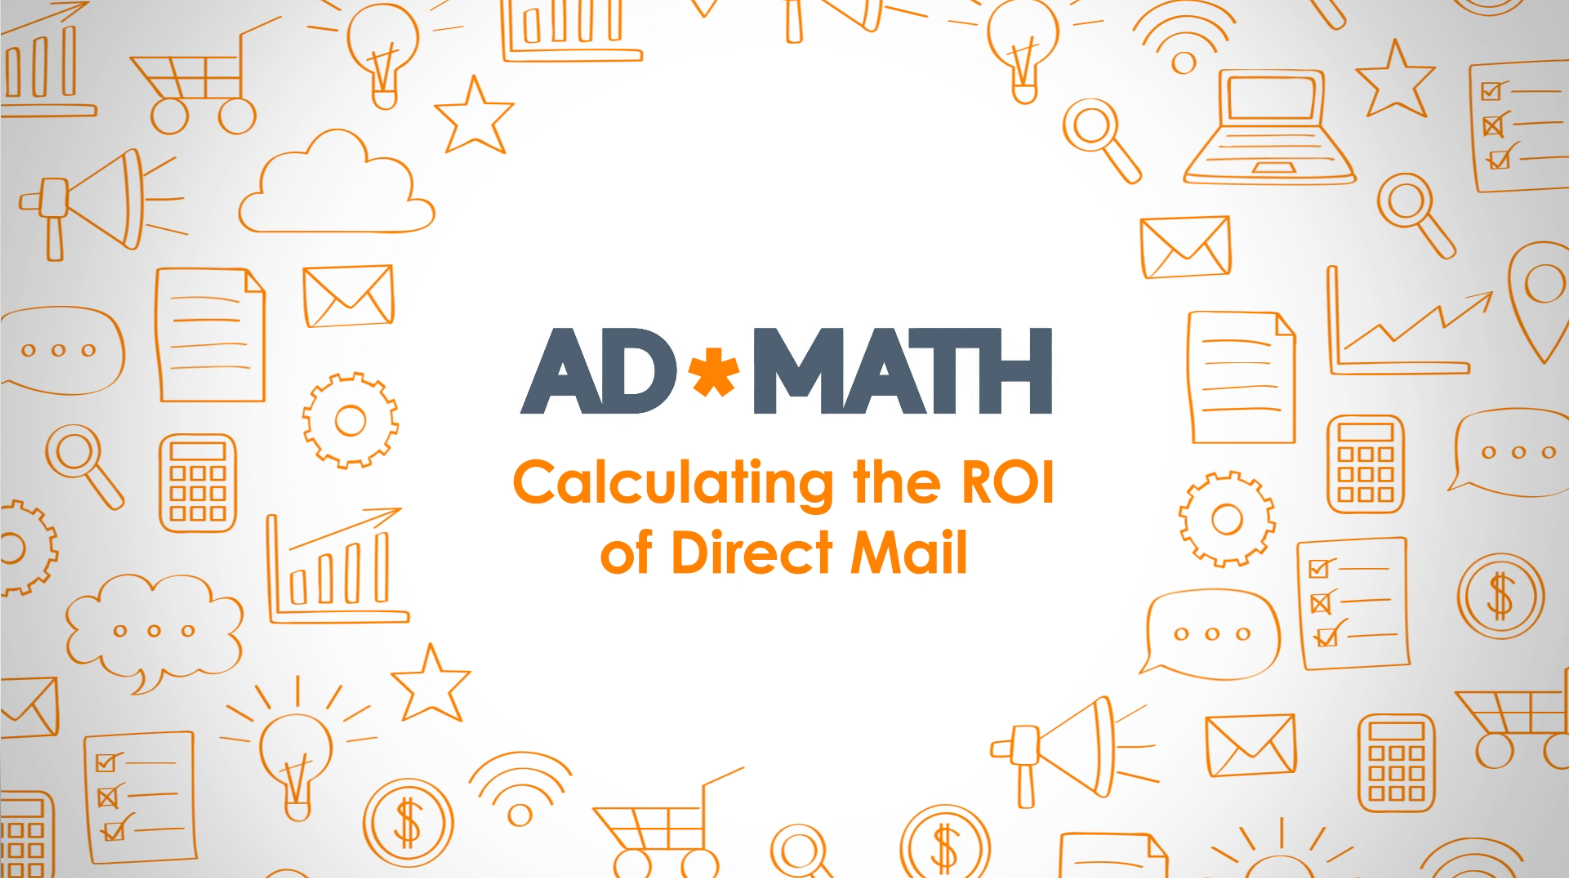 How To Calculate the ROI of Direct Mail